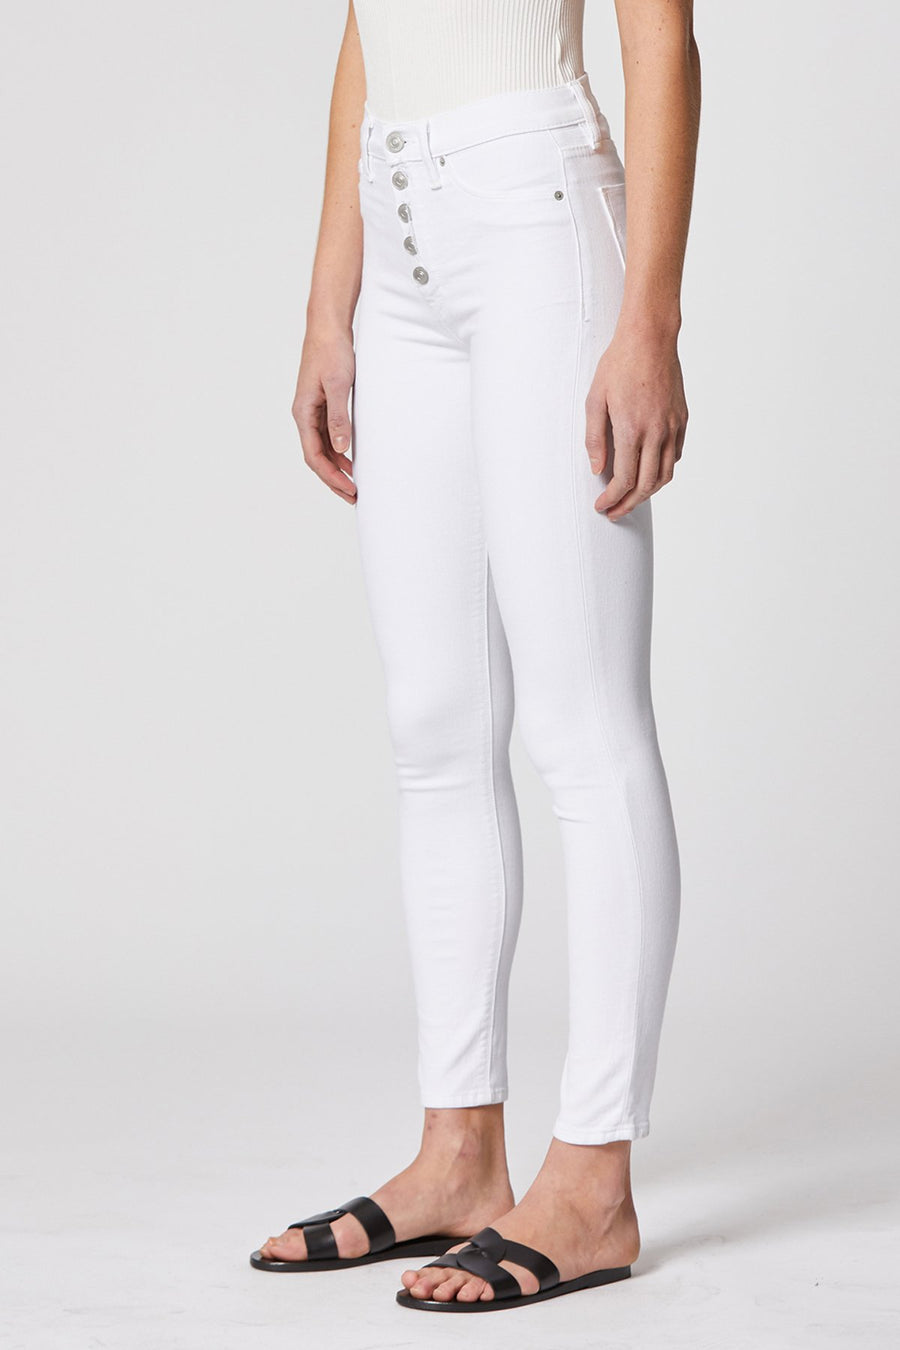 HUDSON JEANS Barbara High Rise with Button-Front in White